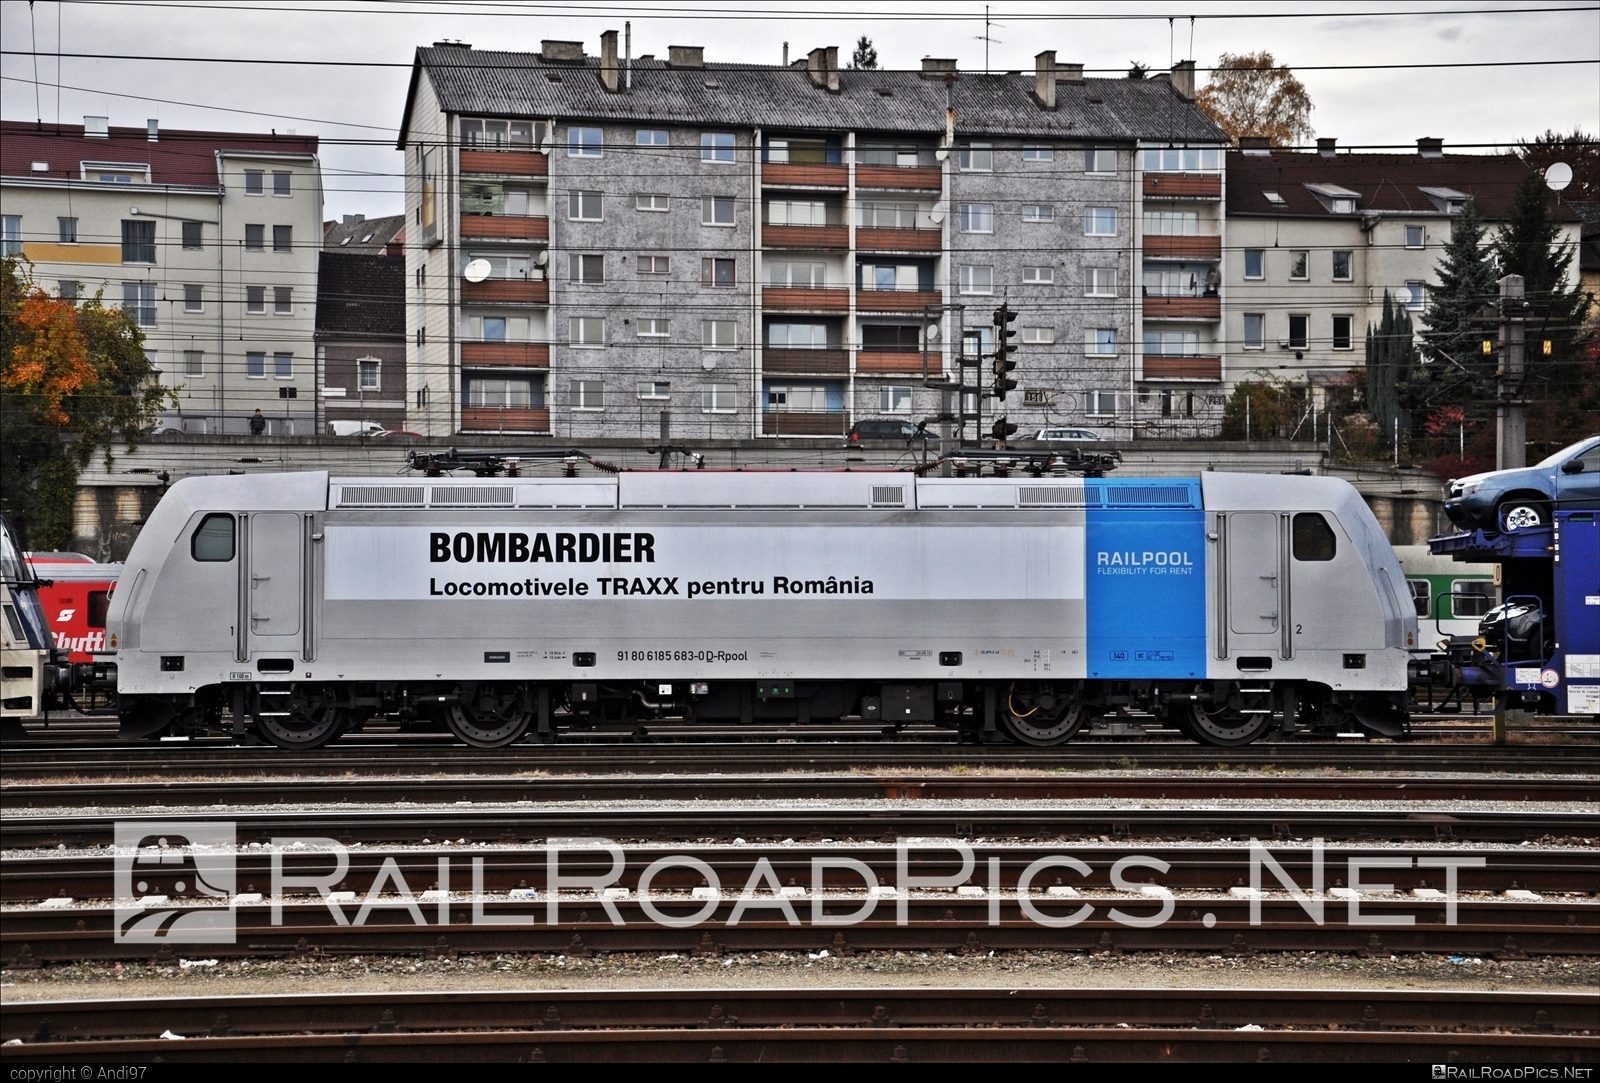 Bombardier TRAXX F140 AC2 - 185 683-0 operated by GRUP FEROVIAR ROMAN S.A. #GrupFeroviarRoman #GrupFeroviarRomanSA #bombardier #bombardiertraxx #gfr #railpool #railpoolgmbh #traxx #traxxf140 #traxxf140ac #traxxf140ac2